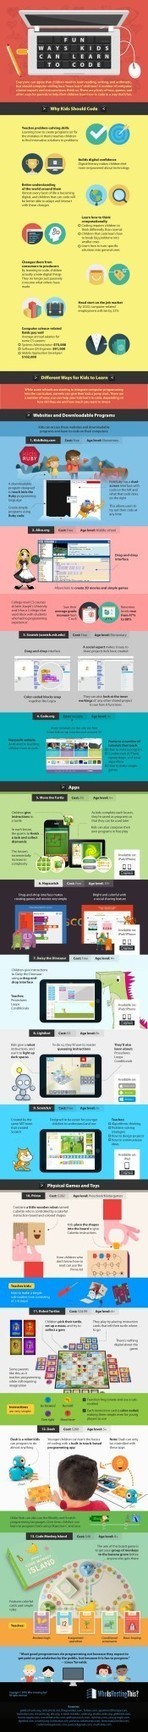 Fun Ways Kids Can Learn to Code Infographic | PowerPoint presentations and PPT templates | Scoop.it